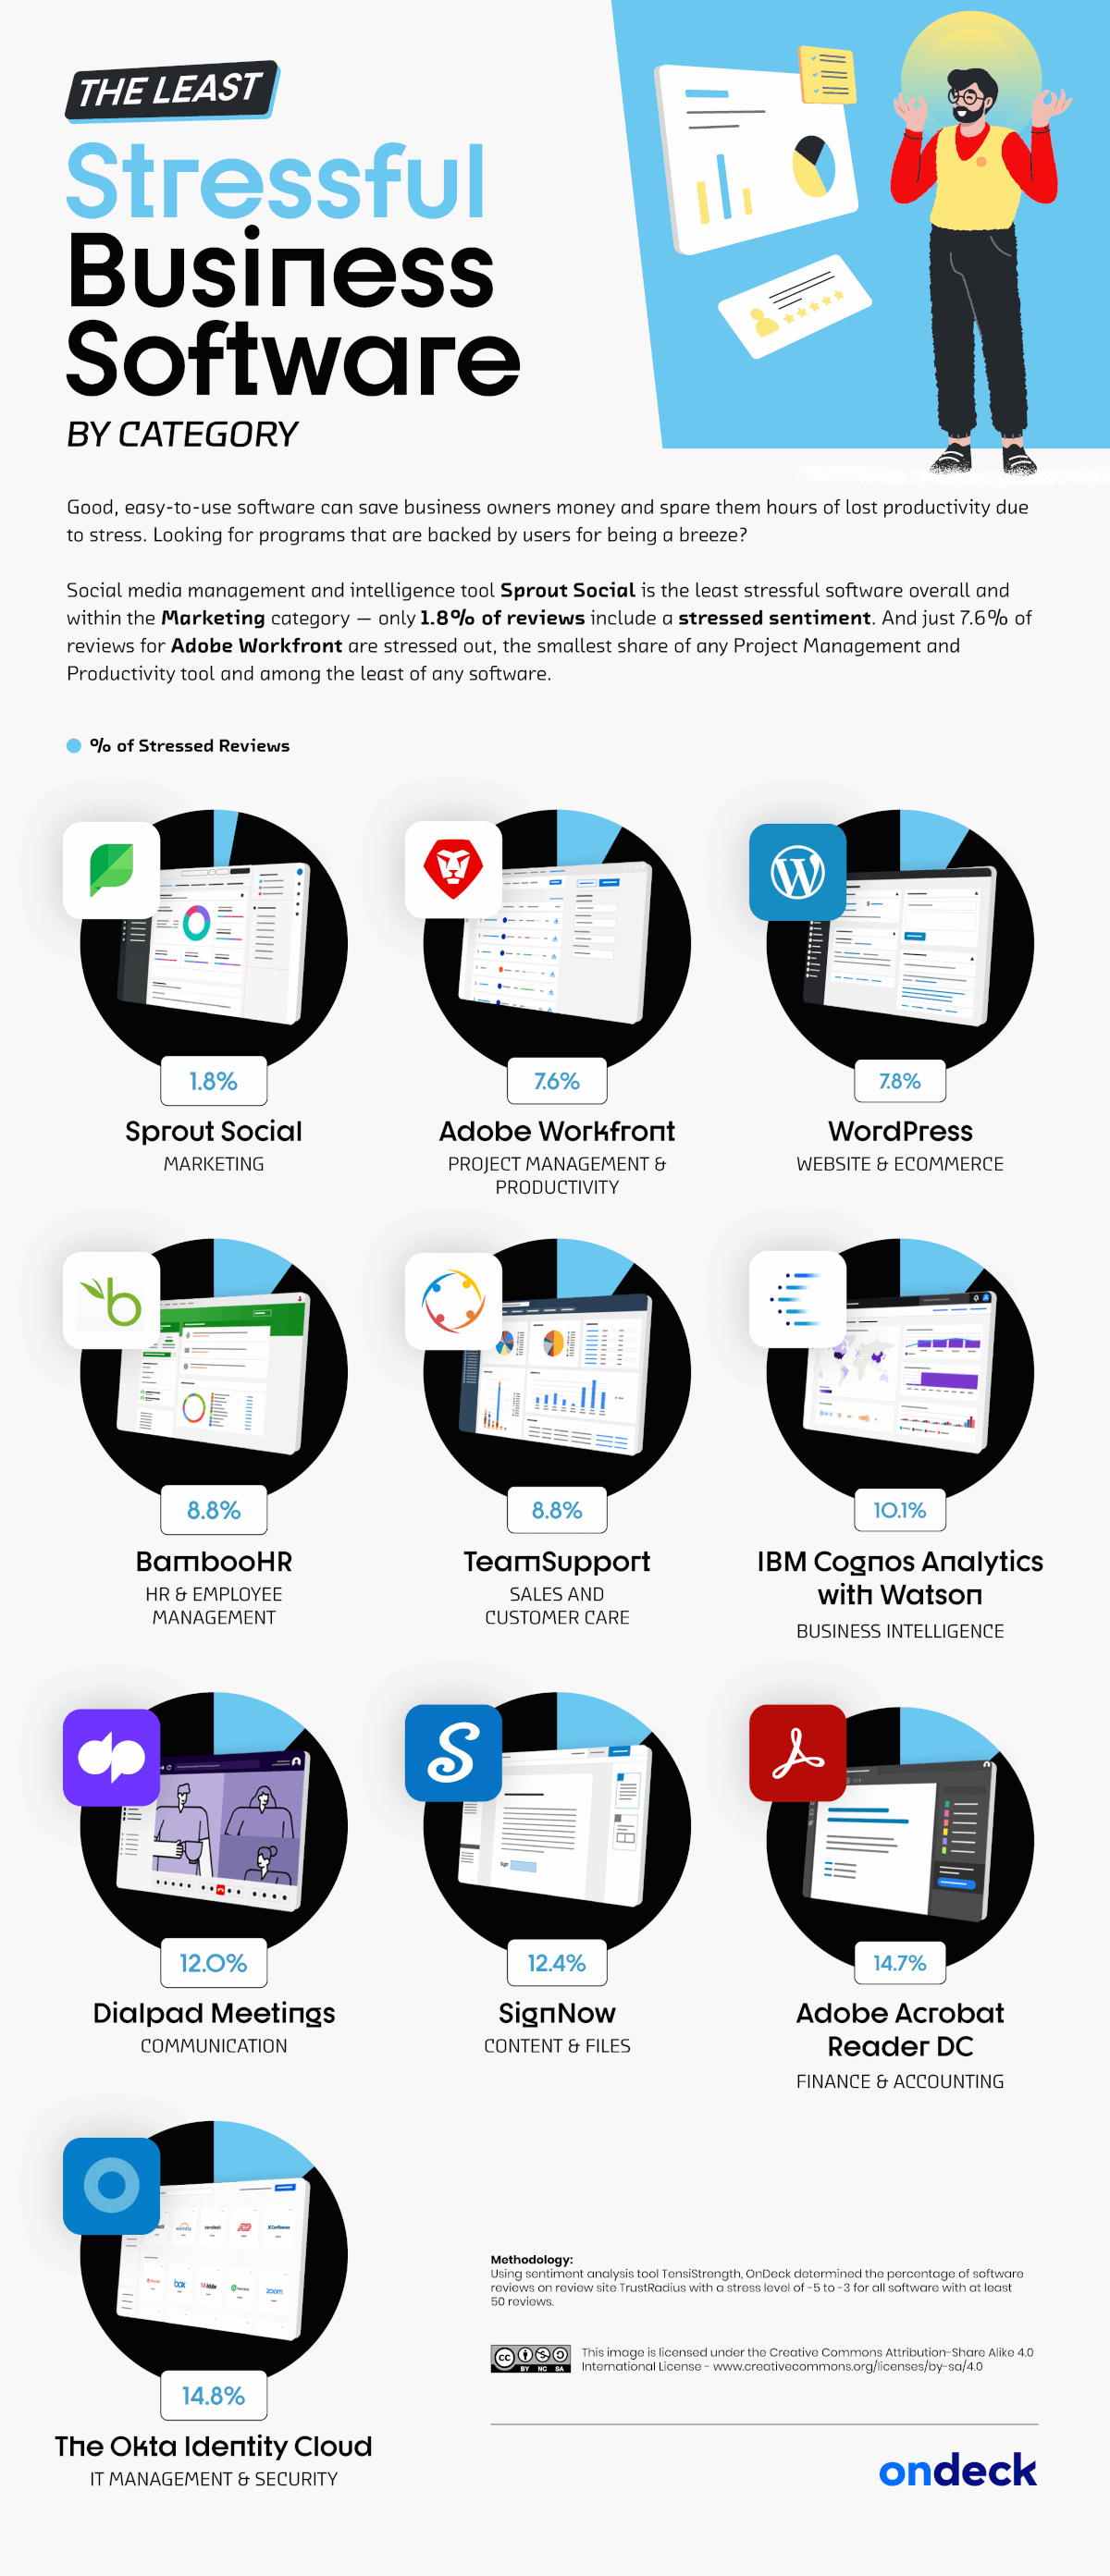 Resume.io infographic on the least stressful business software by category